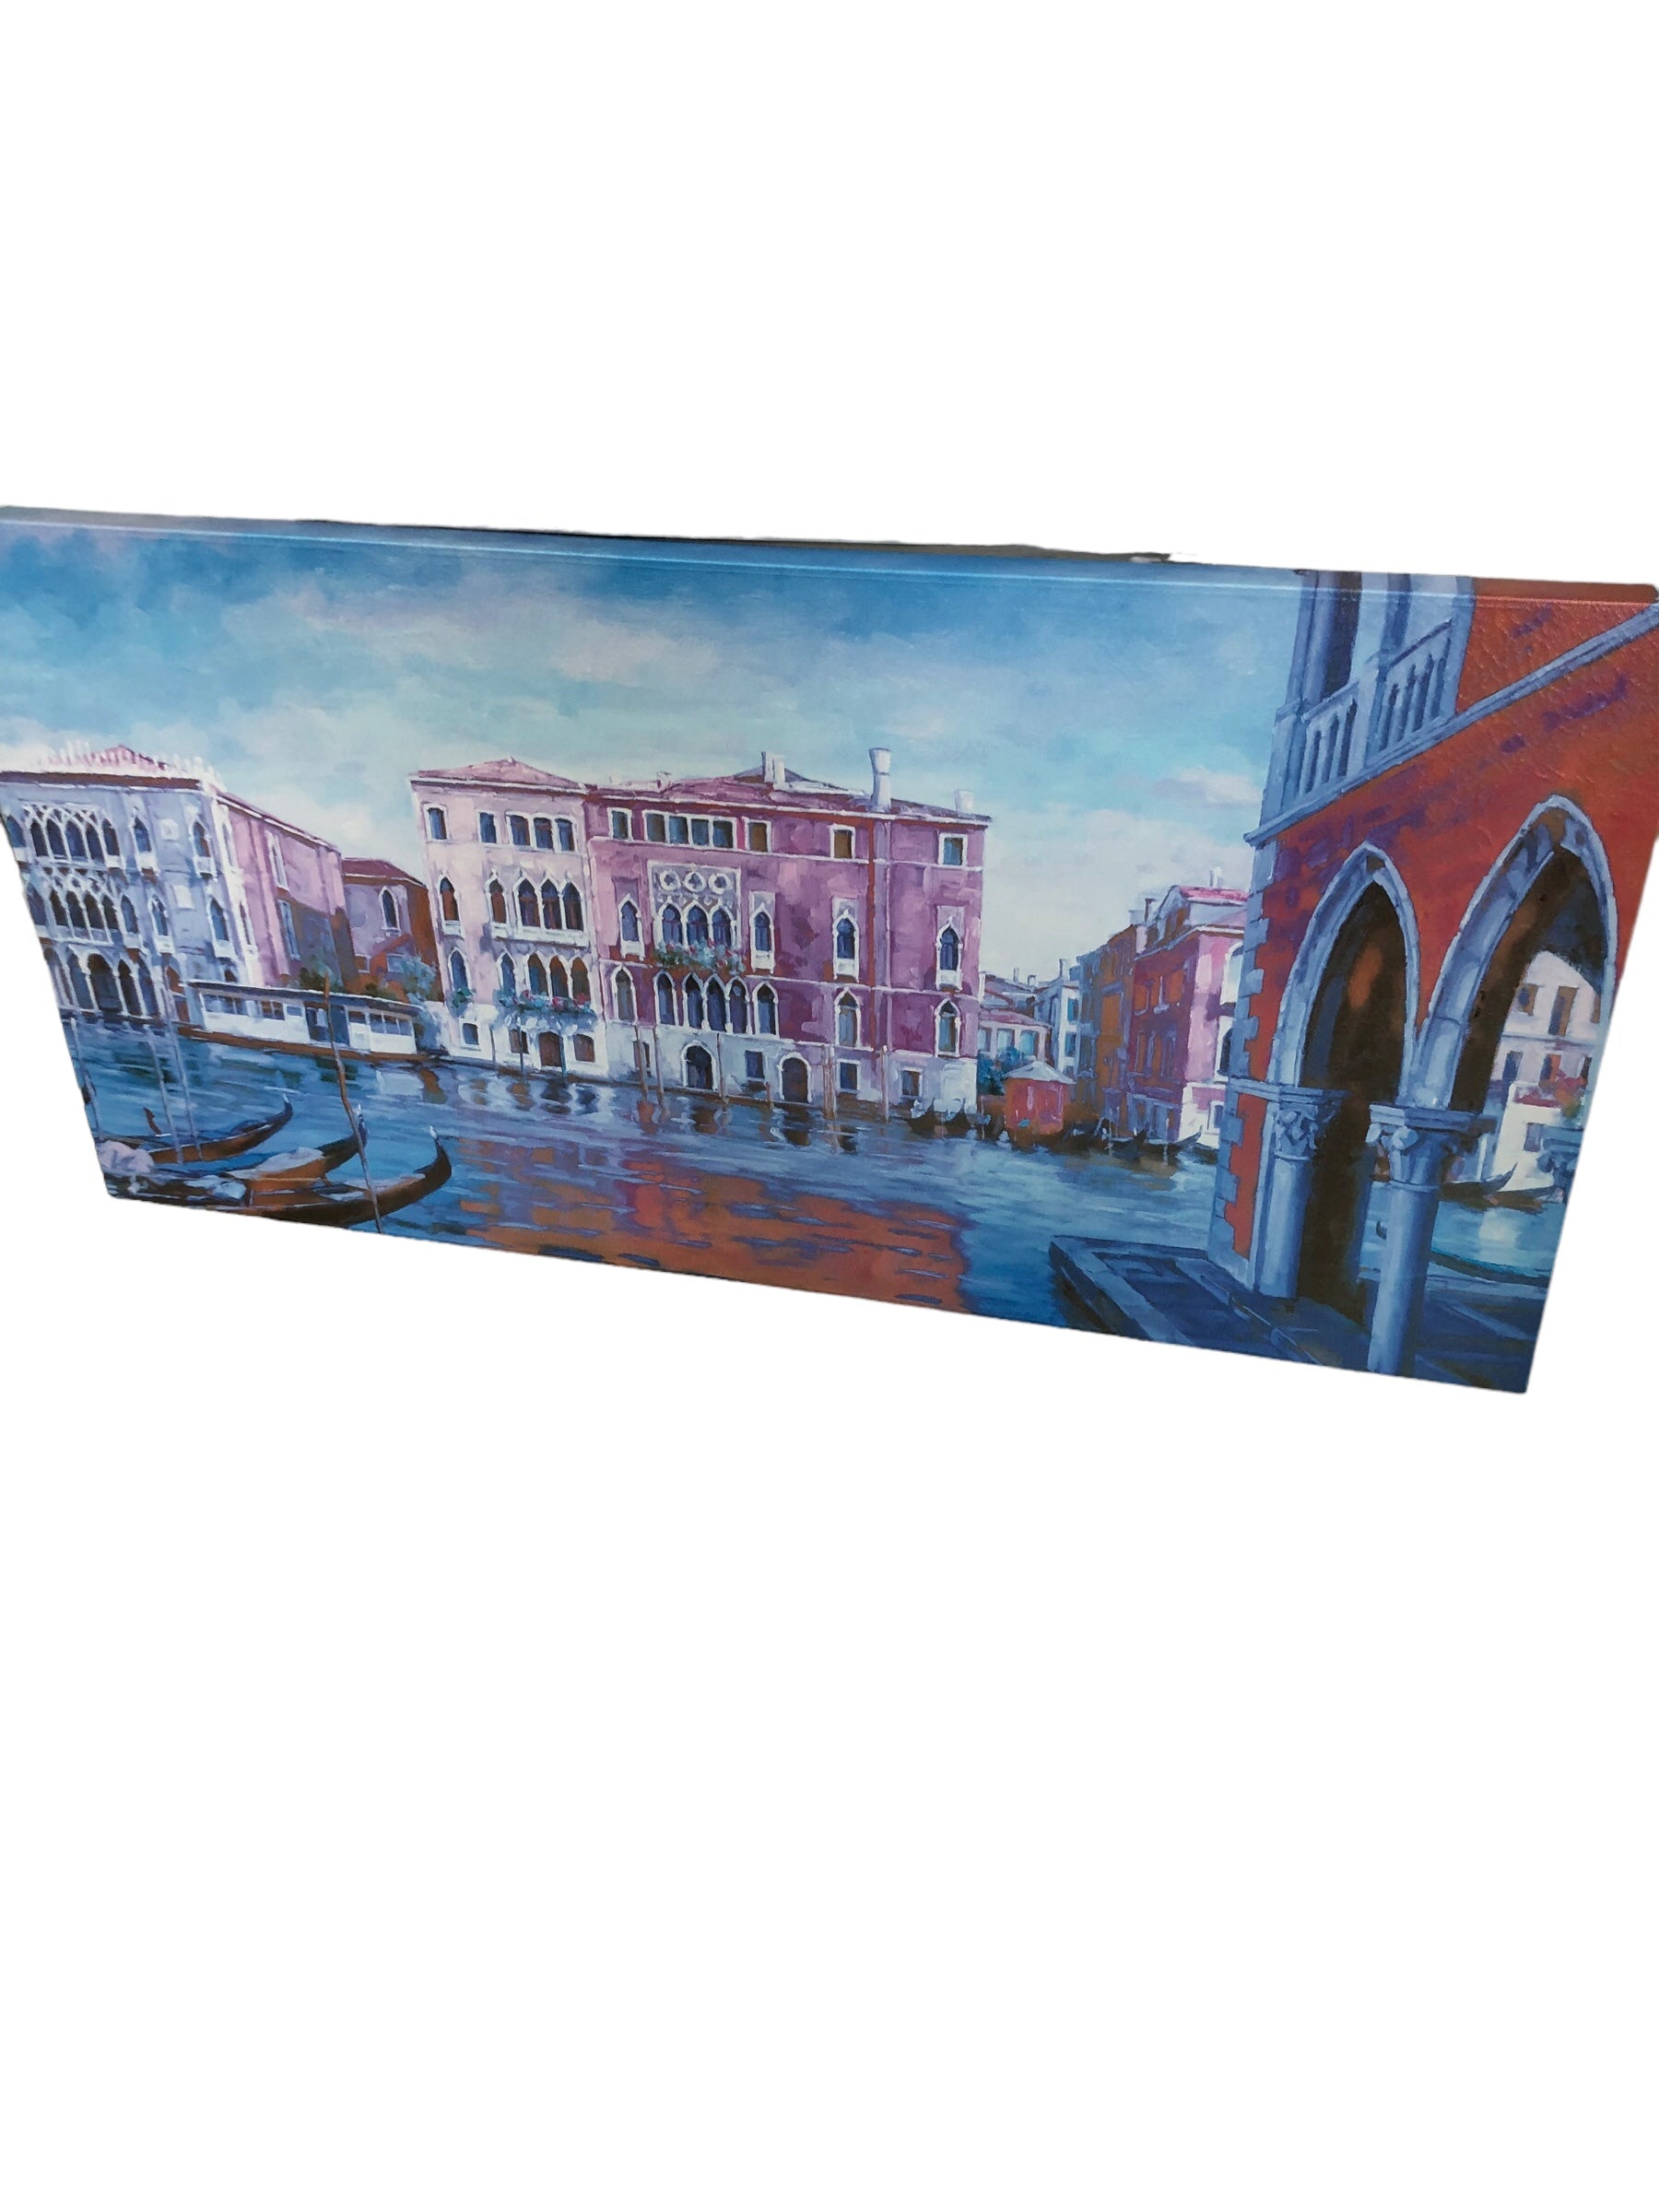 Venice scene with building/water